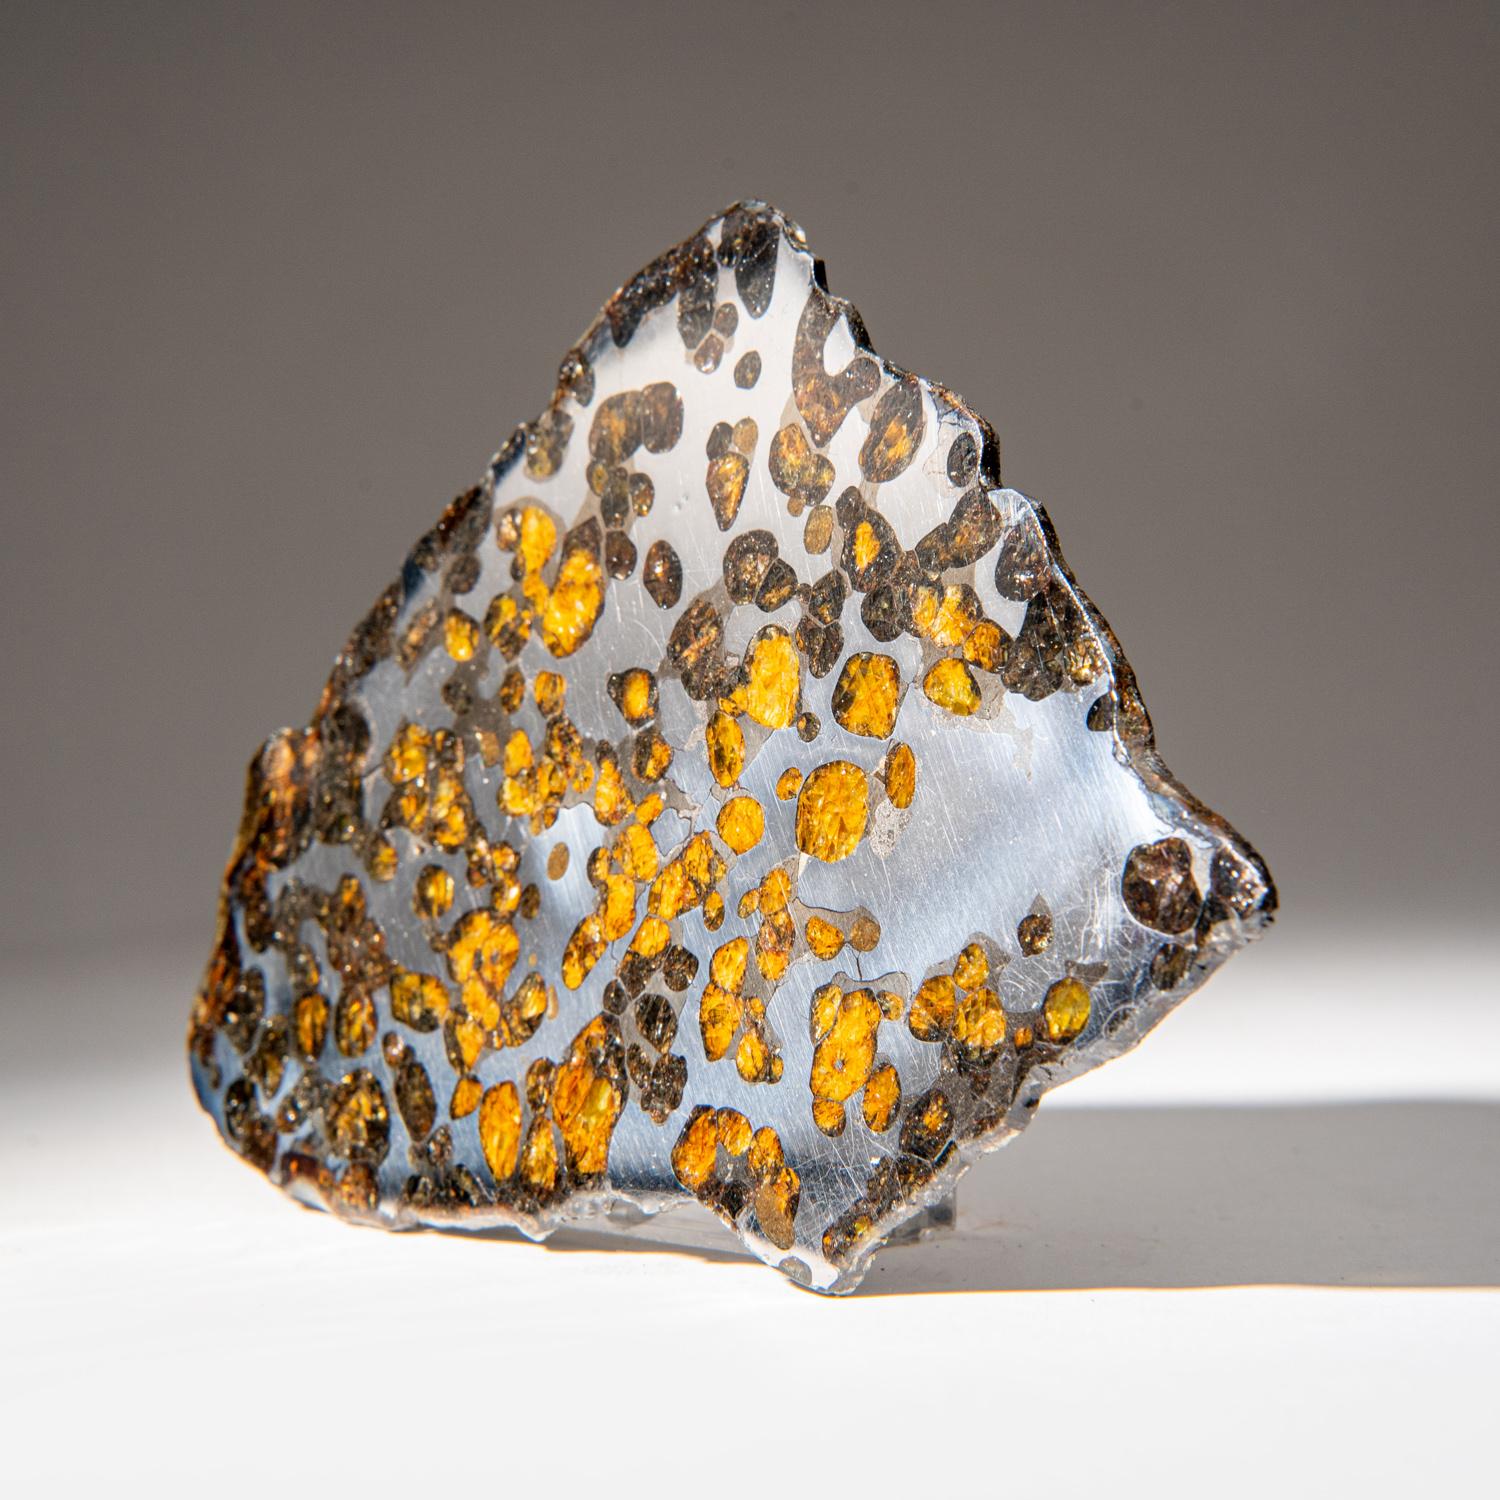 Brenham is a pallasite meteorite found near Haviland, a small town in Kiowa County, Kansas, United States. Pallasites are a type of stony–iron meteorite that when cut and polished show yellowish olivine crystals. The Brenham meteorite is associated